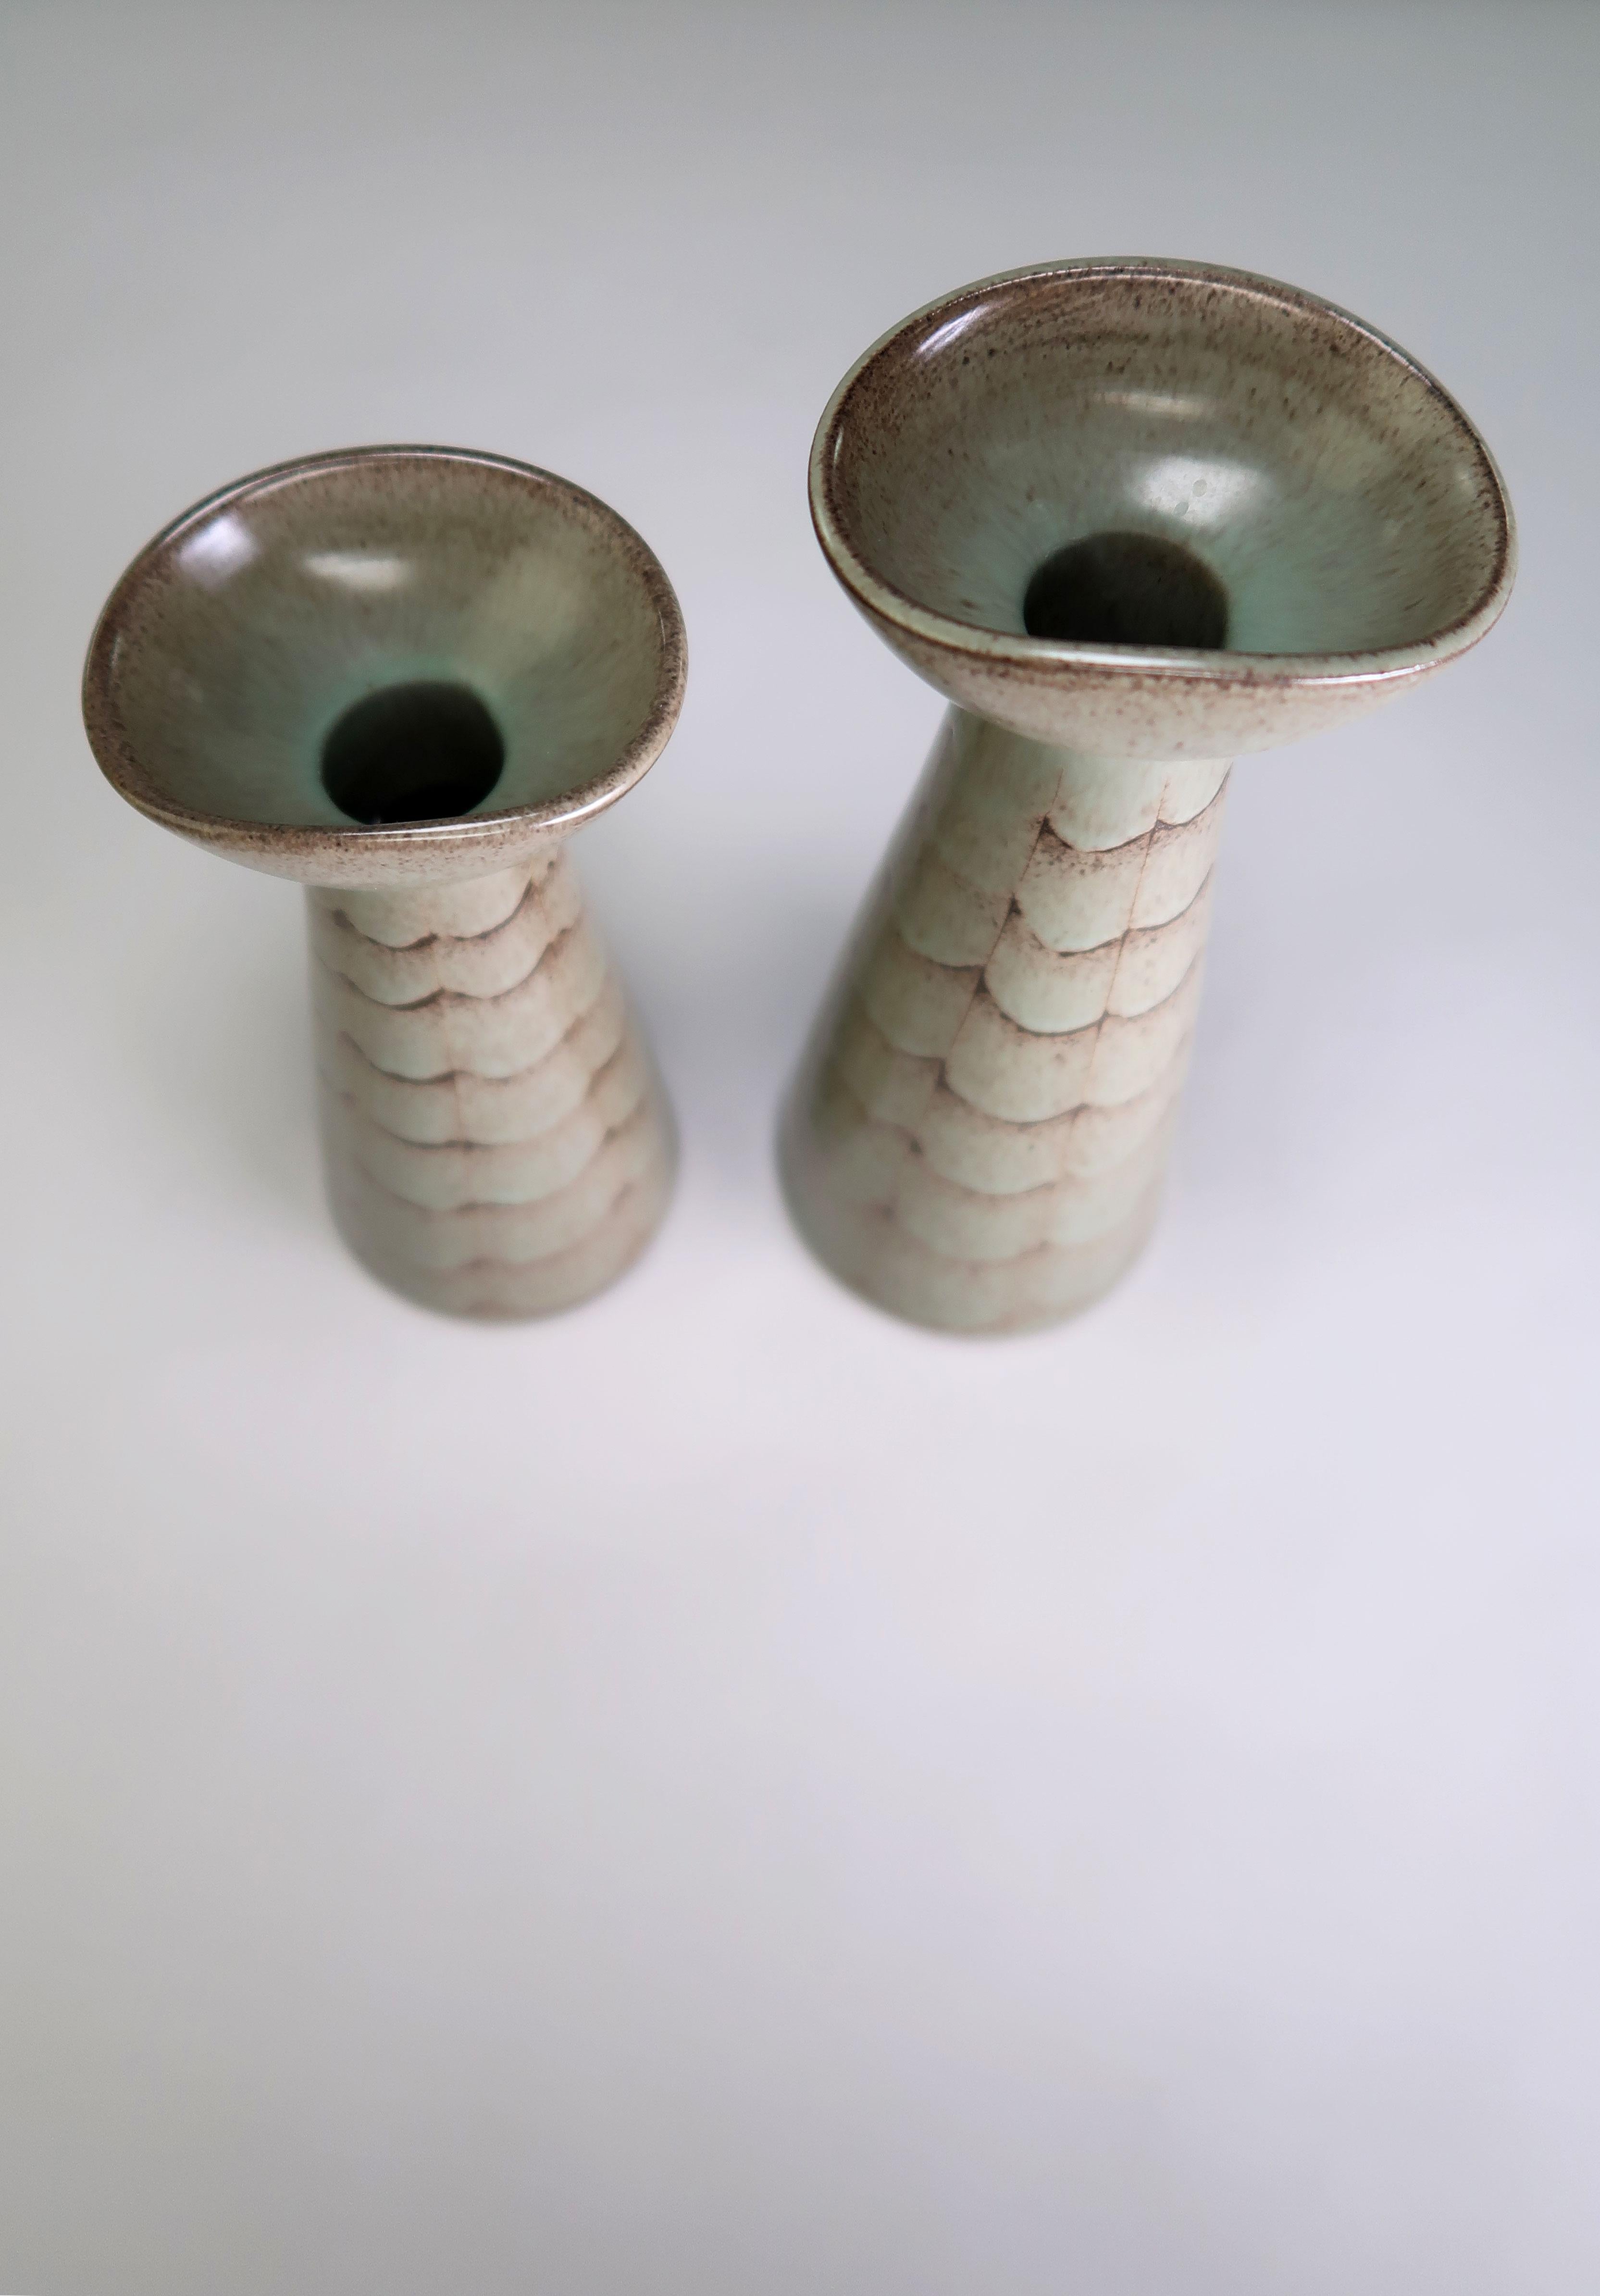 Beautiful set of two Danish Mid-Century Modern stoneware items to be used as candle holders or vases. Designed by Johannes Hansen for Løvemose Keramik and manufactured on the small Danish island of Langeland in the 1950s. Handmade and hand decorated